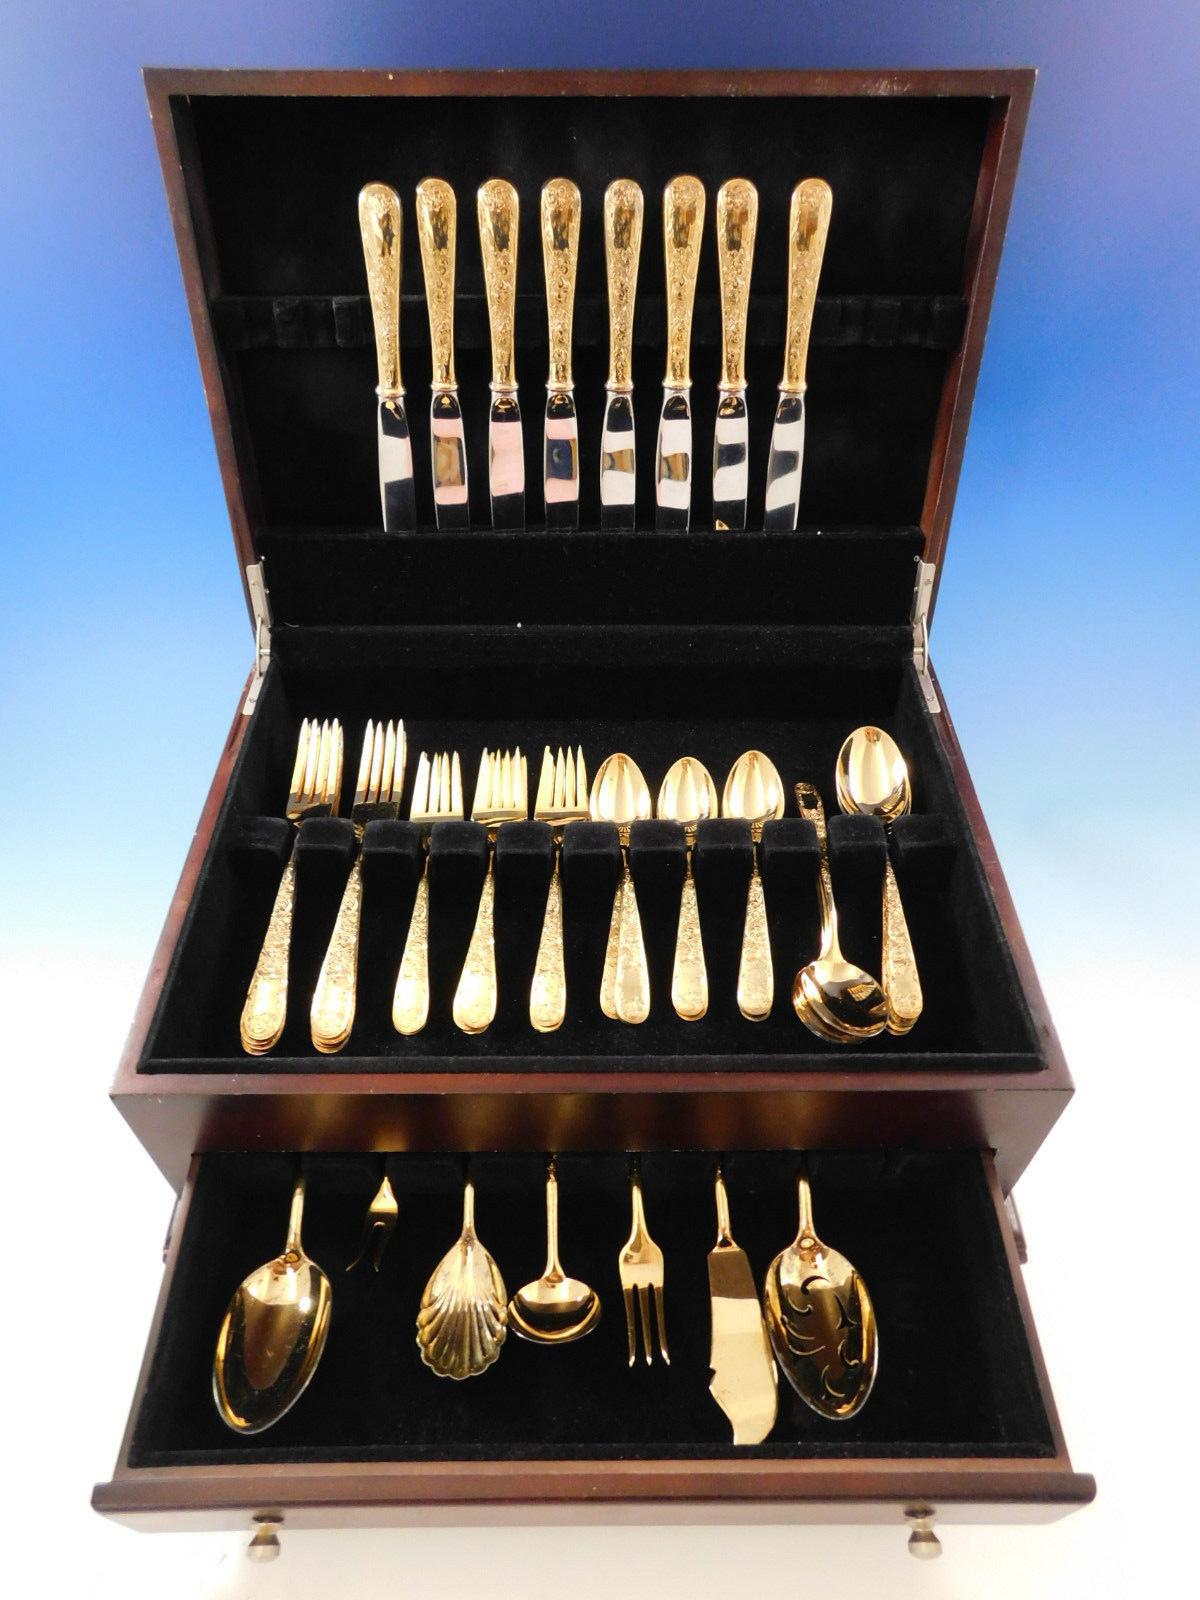 Old Maryland engraved by Kirk Vermeil (completely gold-washed) sterling silver flatware set, 47 pieces. This set includes:

Eight knives, 9